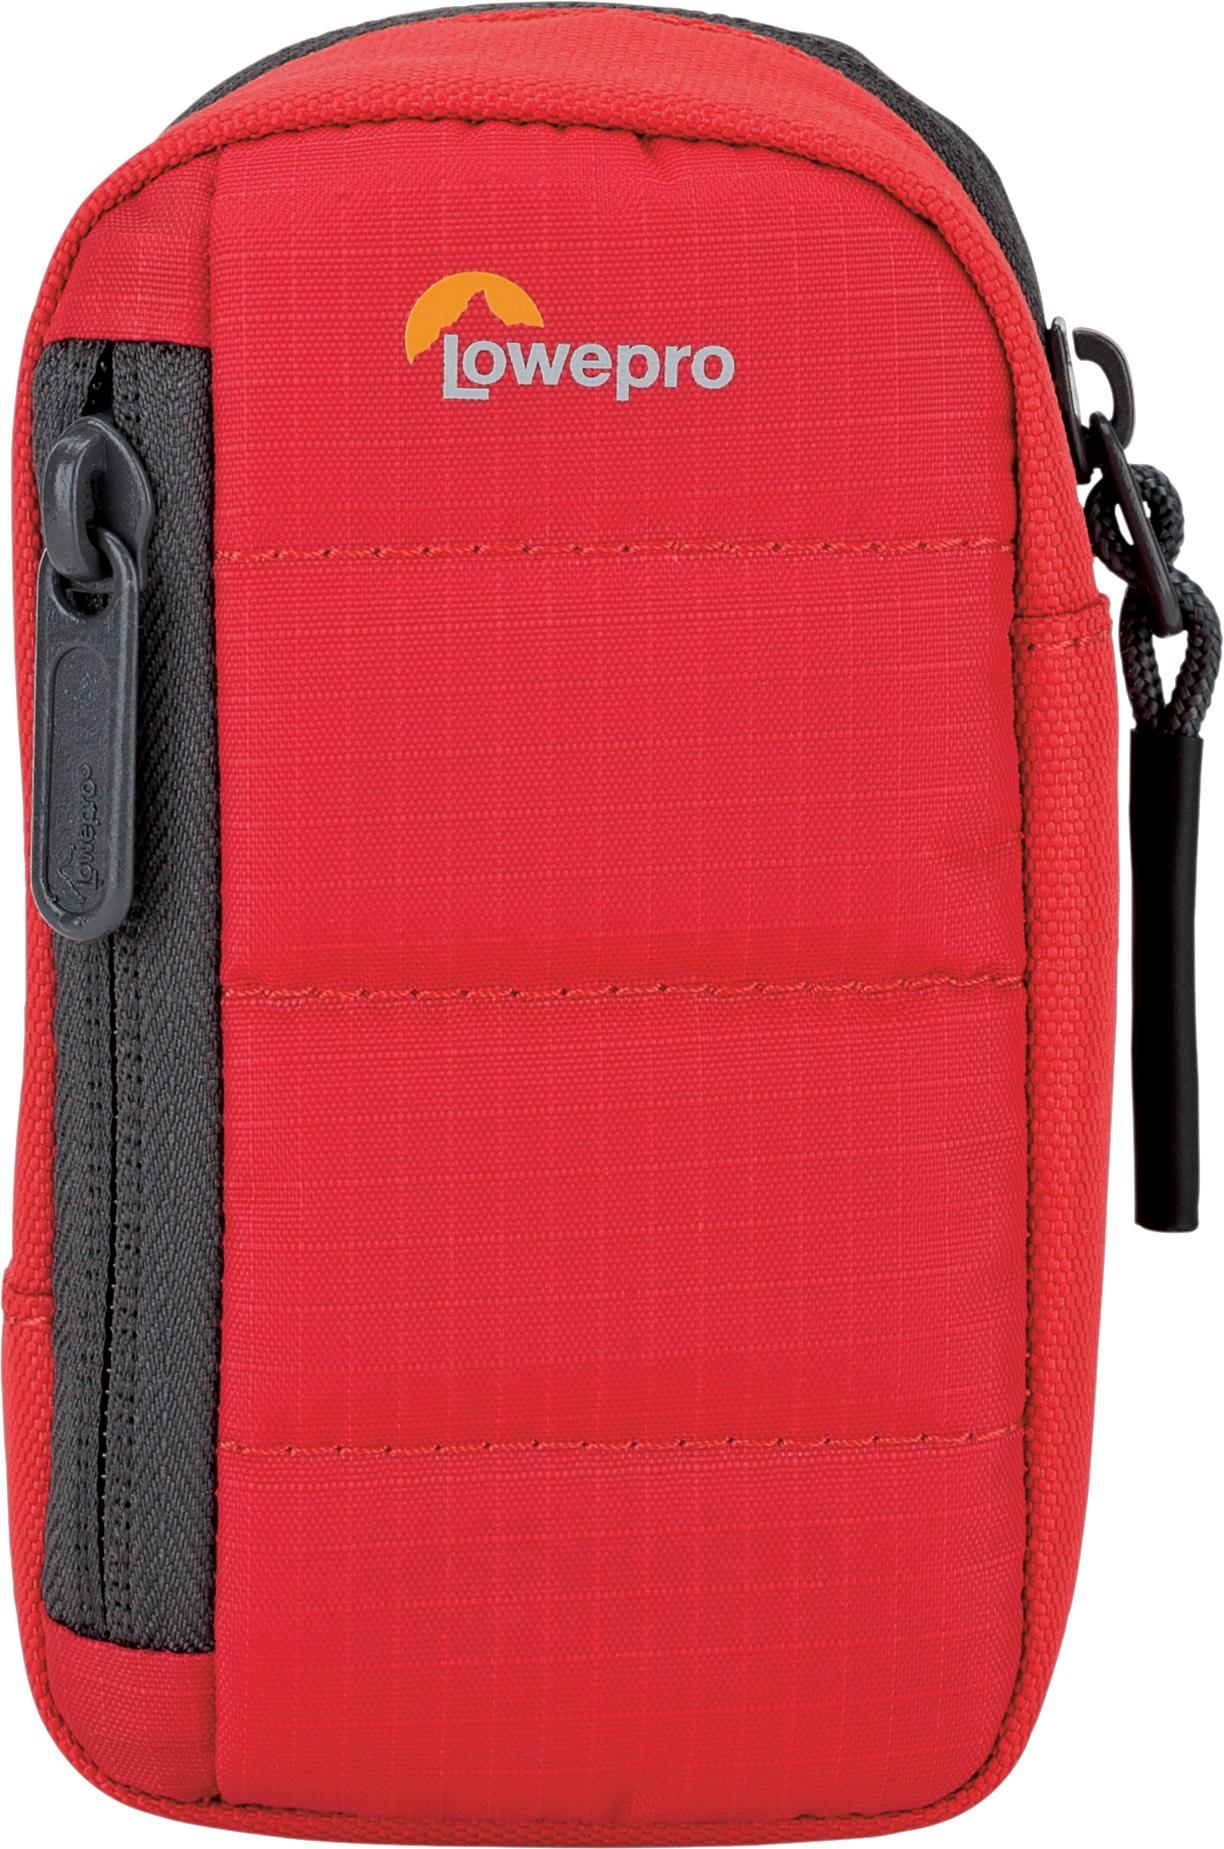 Angle View: Lowepro - Tahoe CS 20 Camera Case - Red